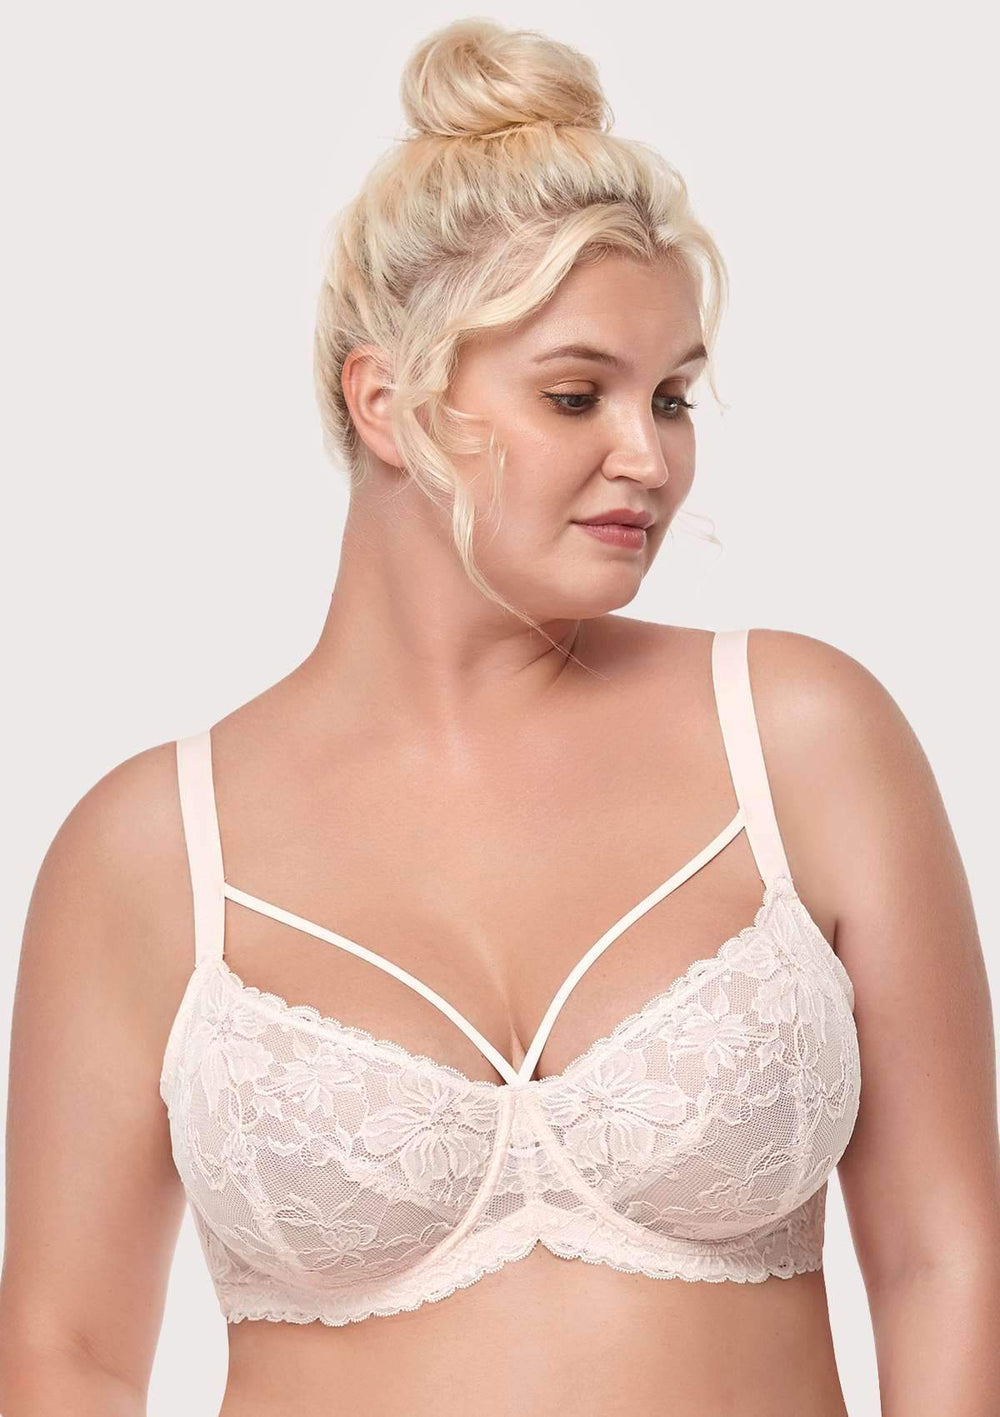 Does changing the bra style change your size? - Page 17 of 17 - Panache  Lingerie